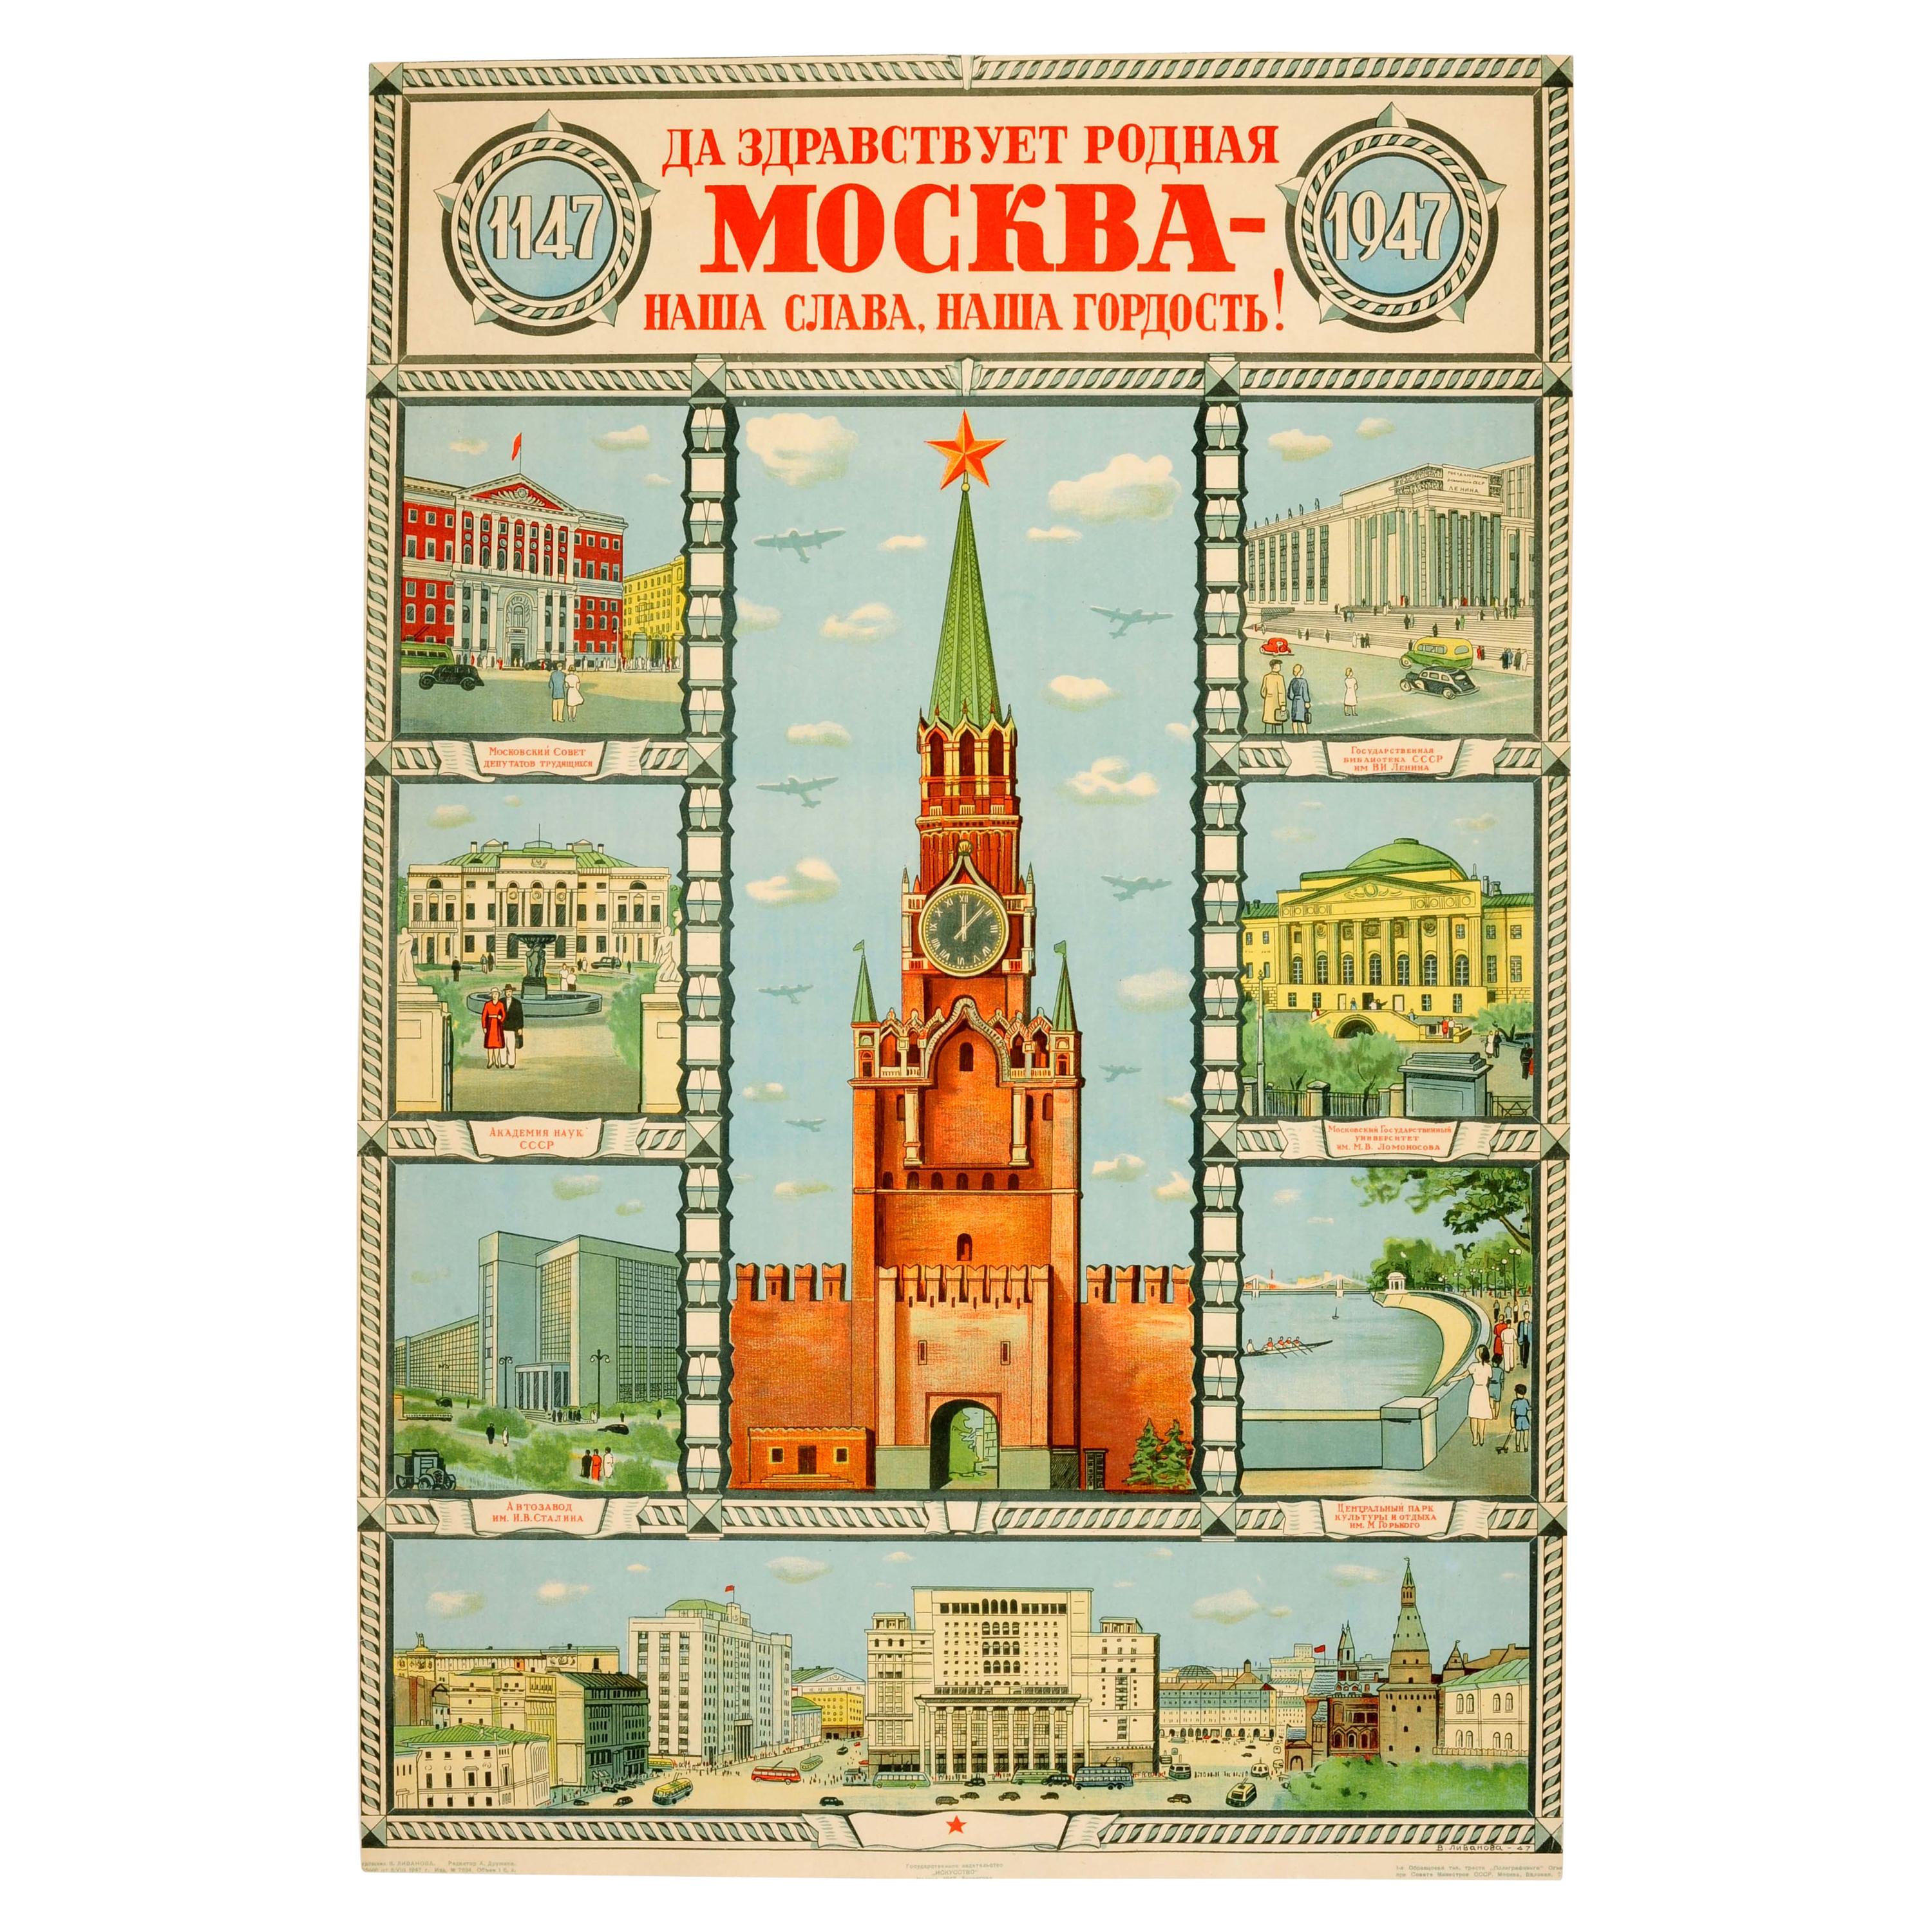 Original Vintage Soviet Poster Long Live Our Moscow Our Glory & Pride 1147-1947 For Sale